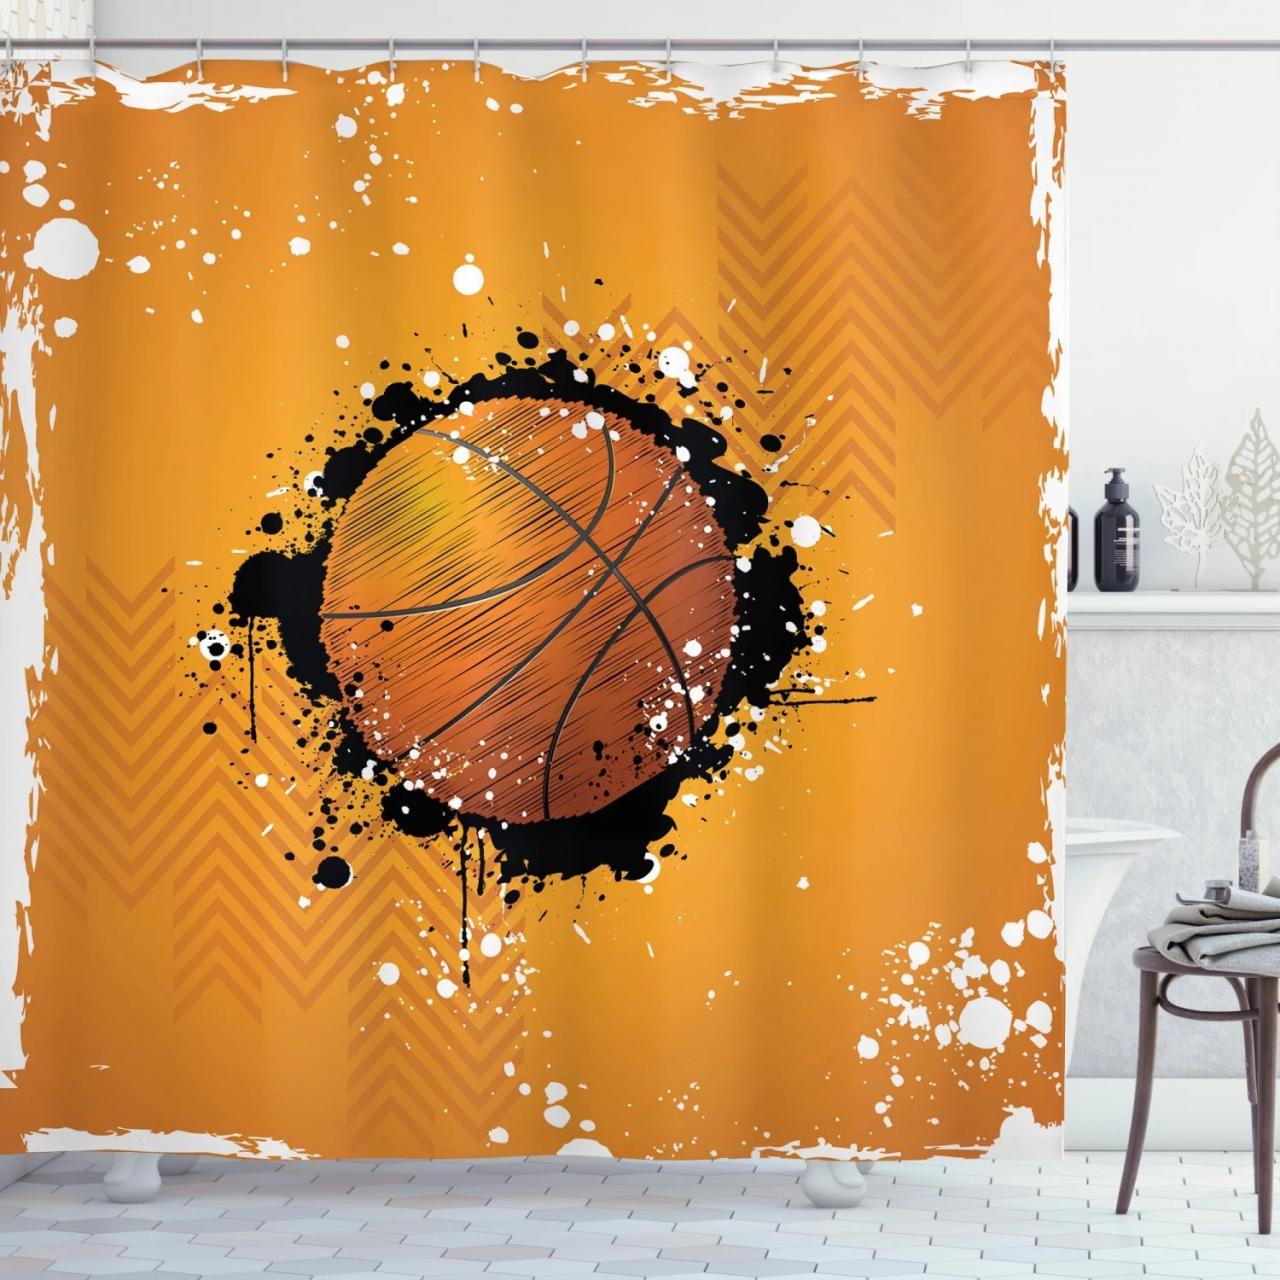 Basketball Shower Curtain, Basketball and Paint Splashes on Abstract